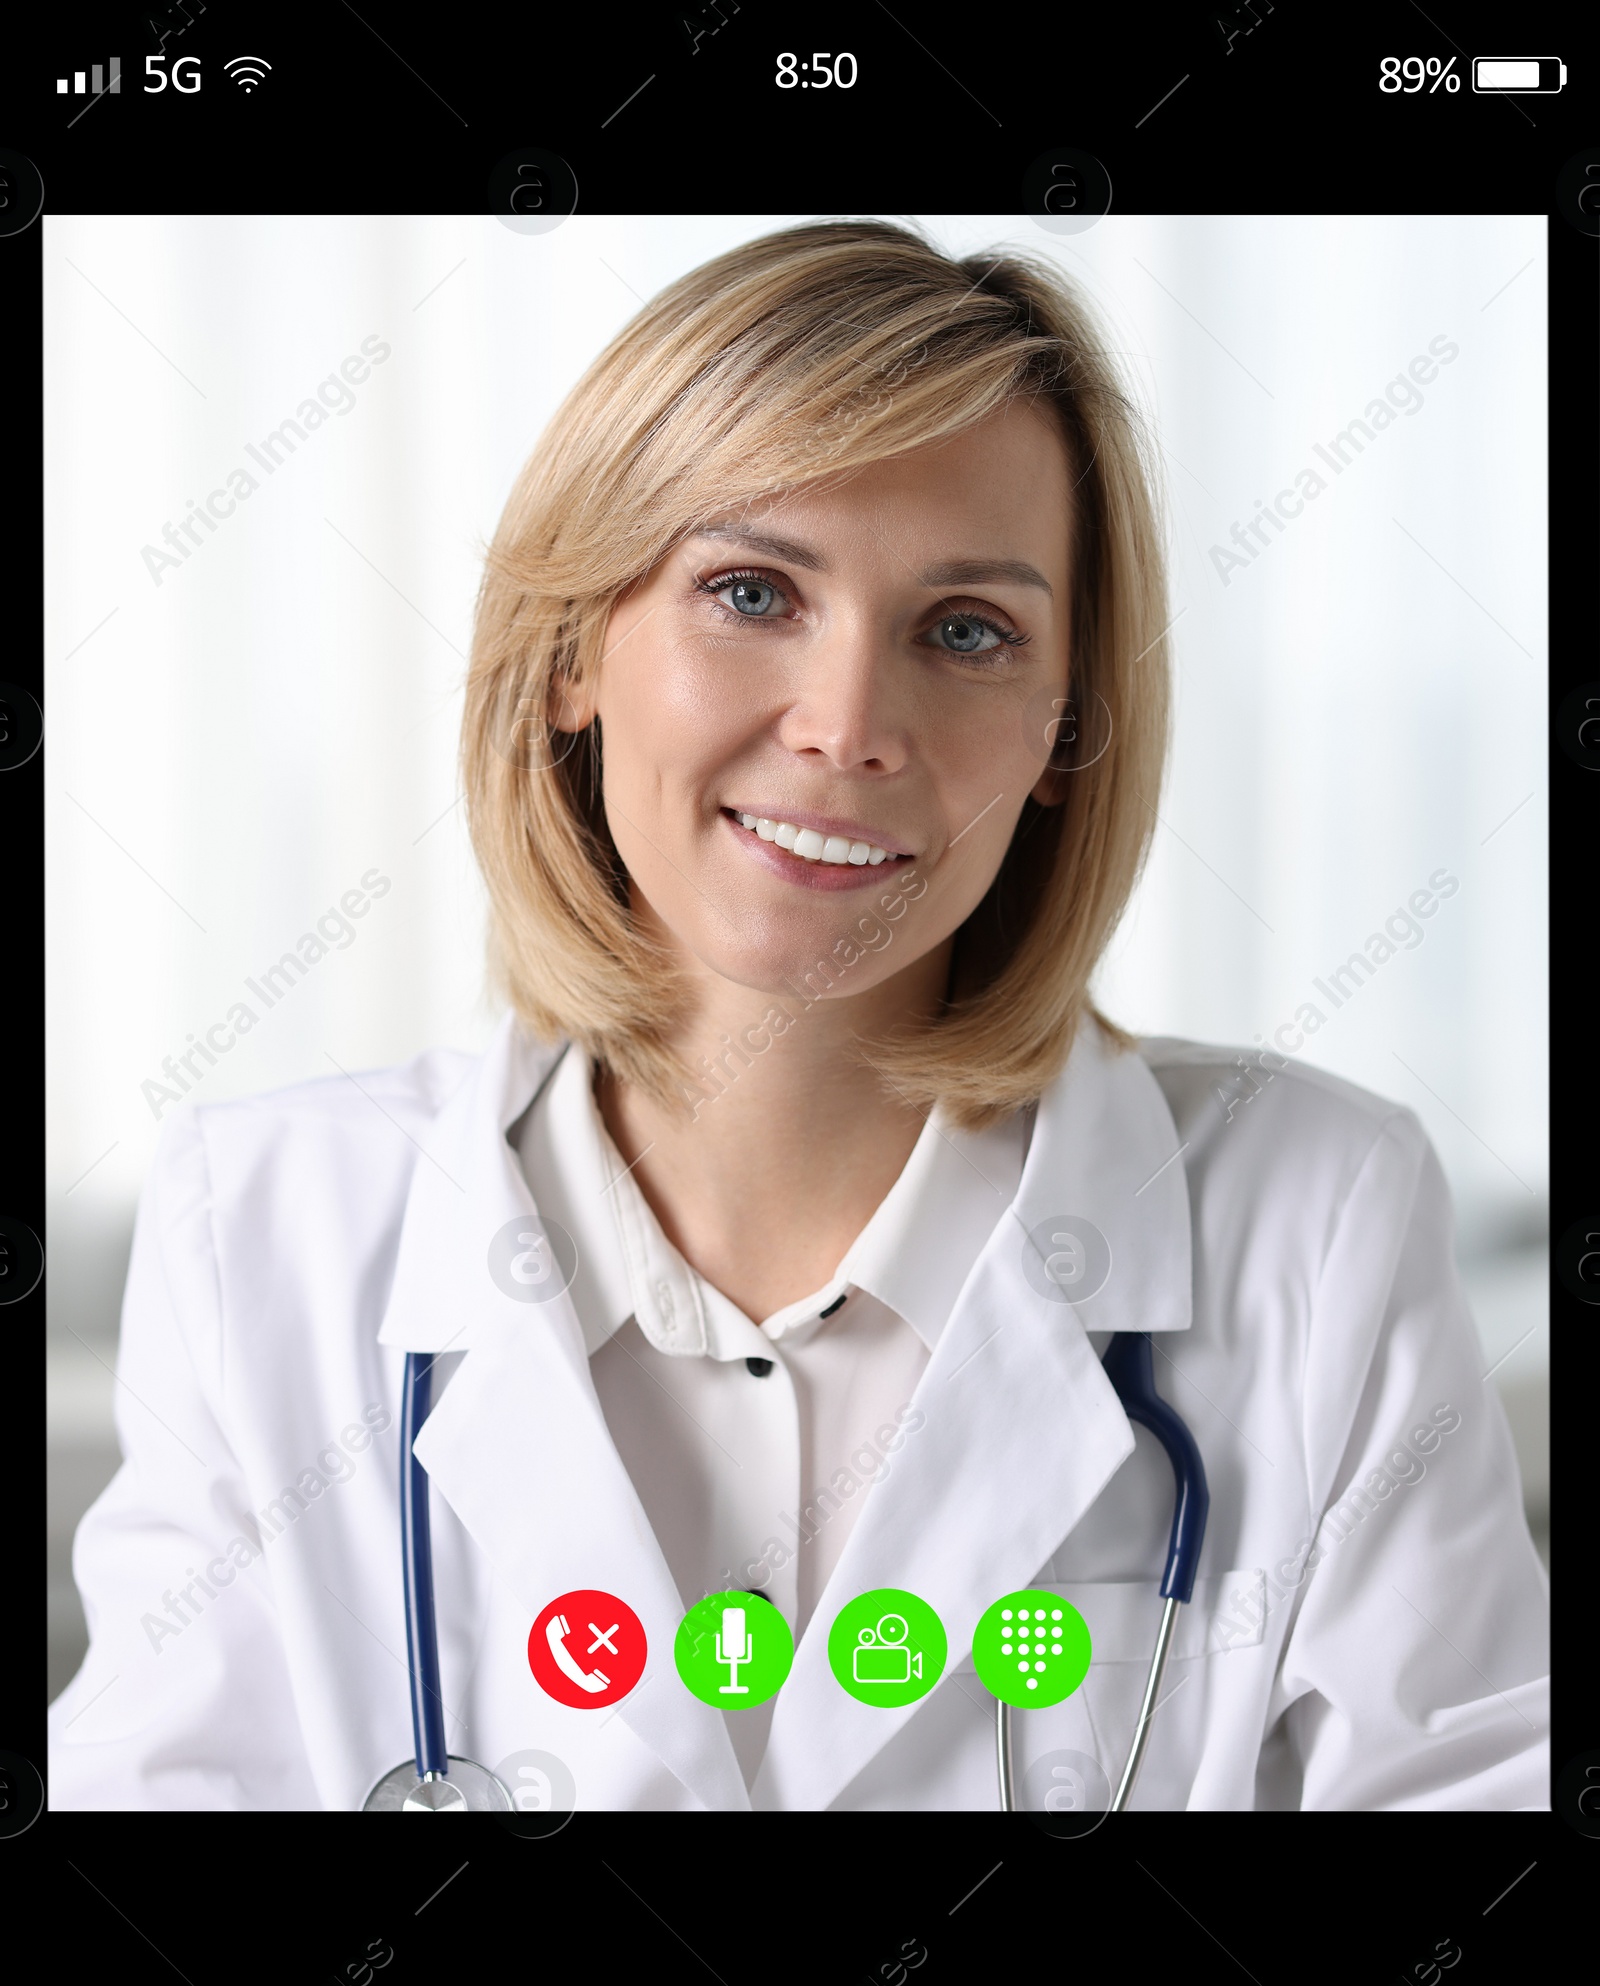 Image of Online medical consultation. Doctor working via video chat application